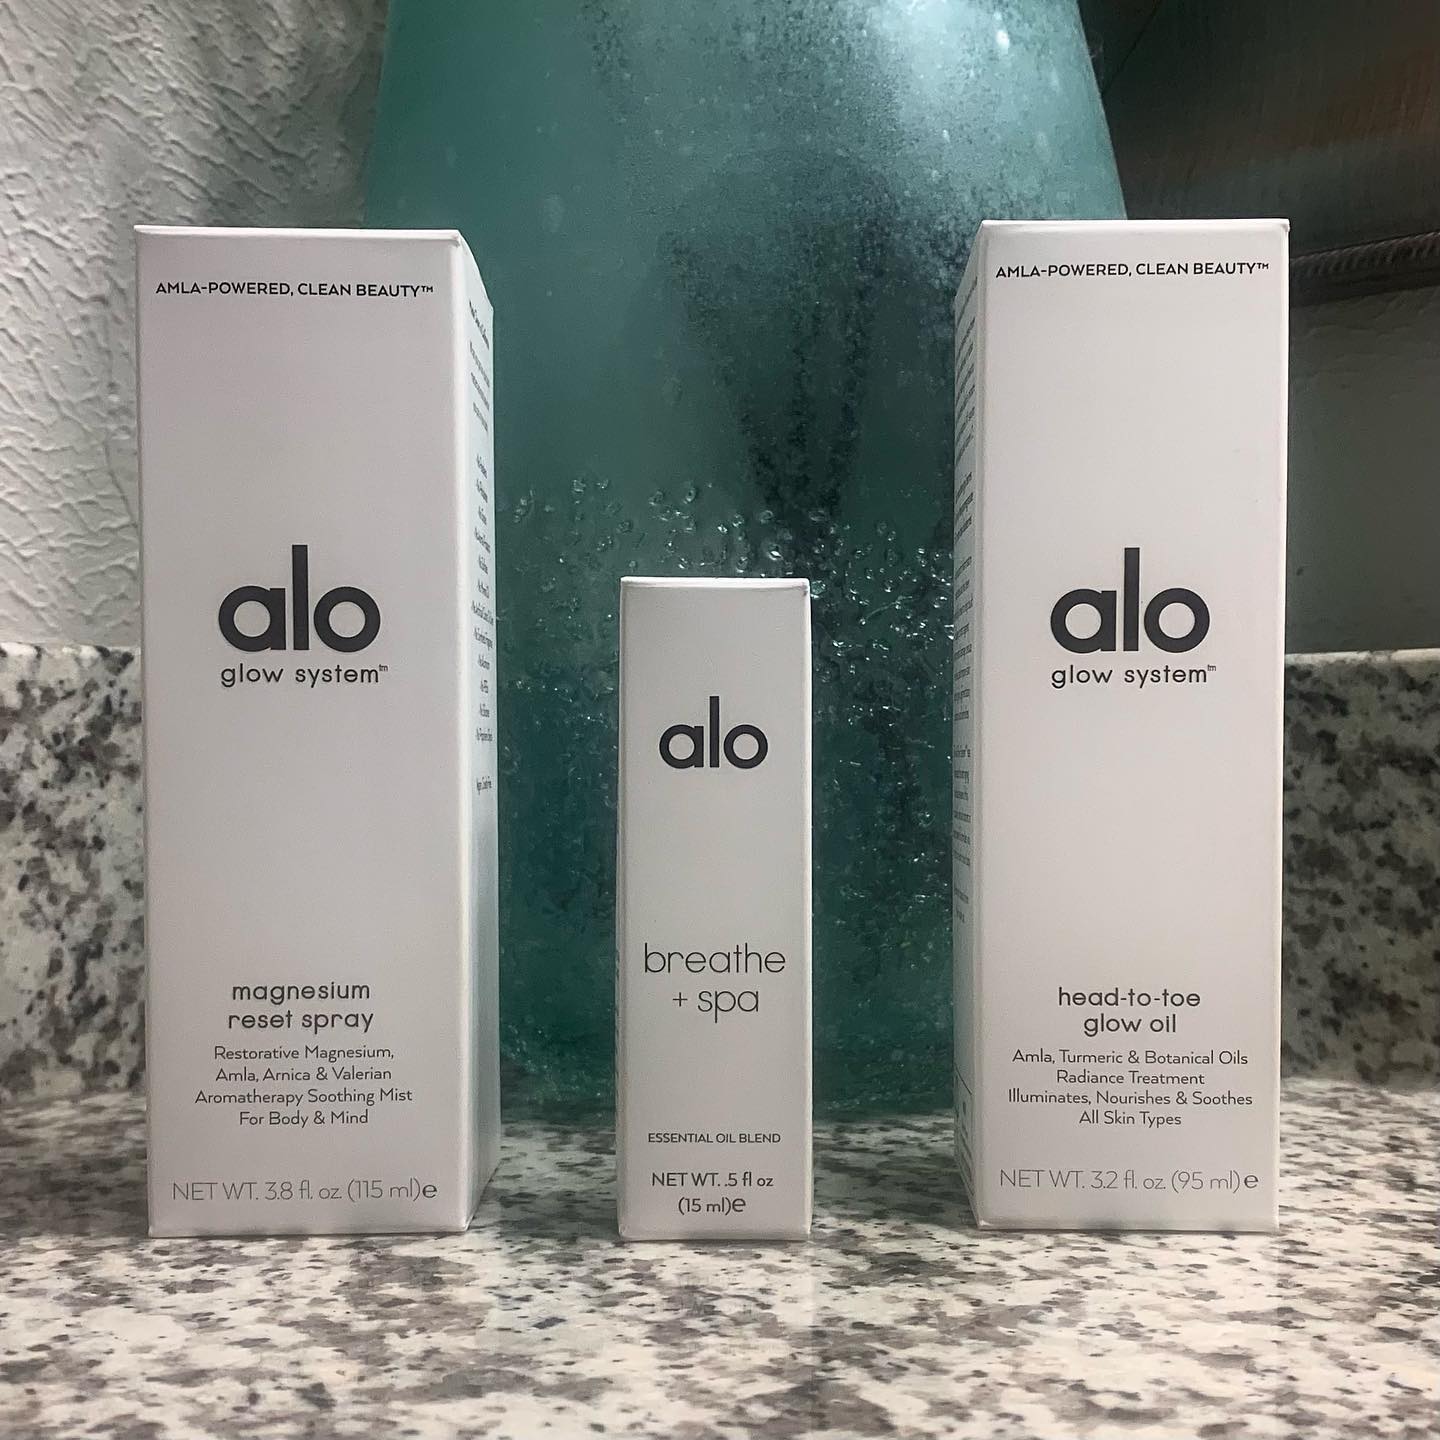 Instagram Fave Alo Yoga Launched a Skin-Care Line